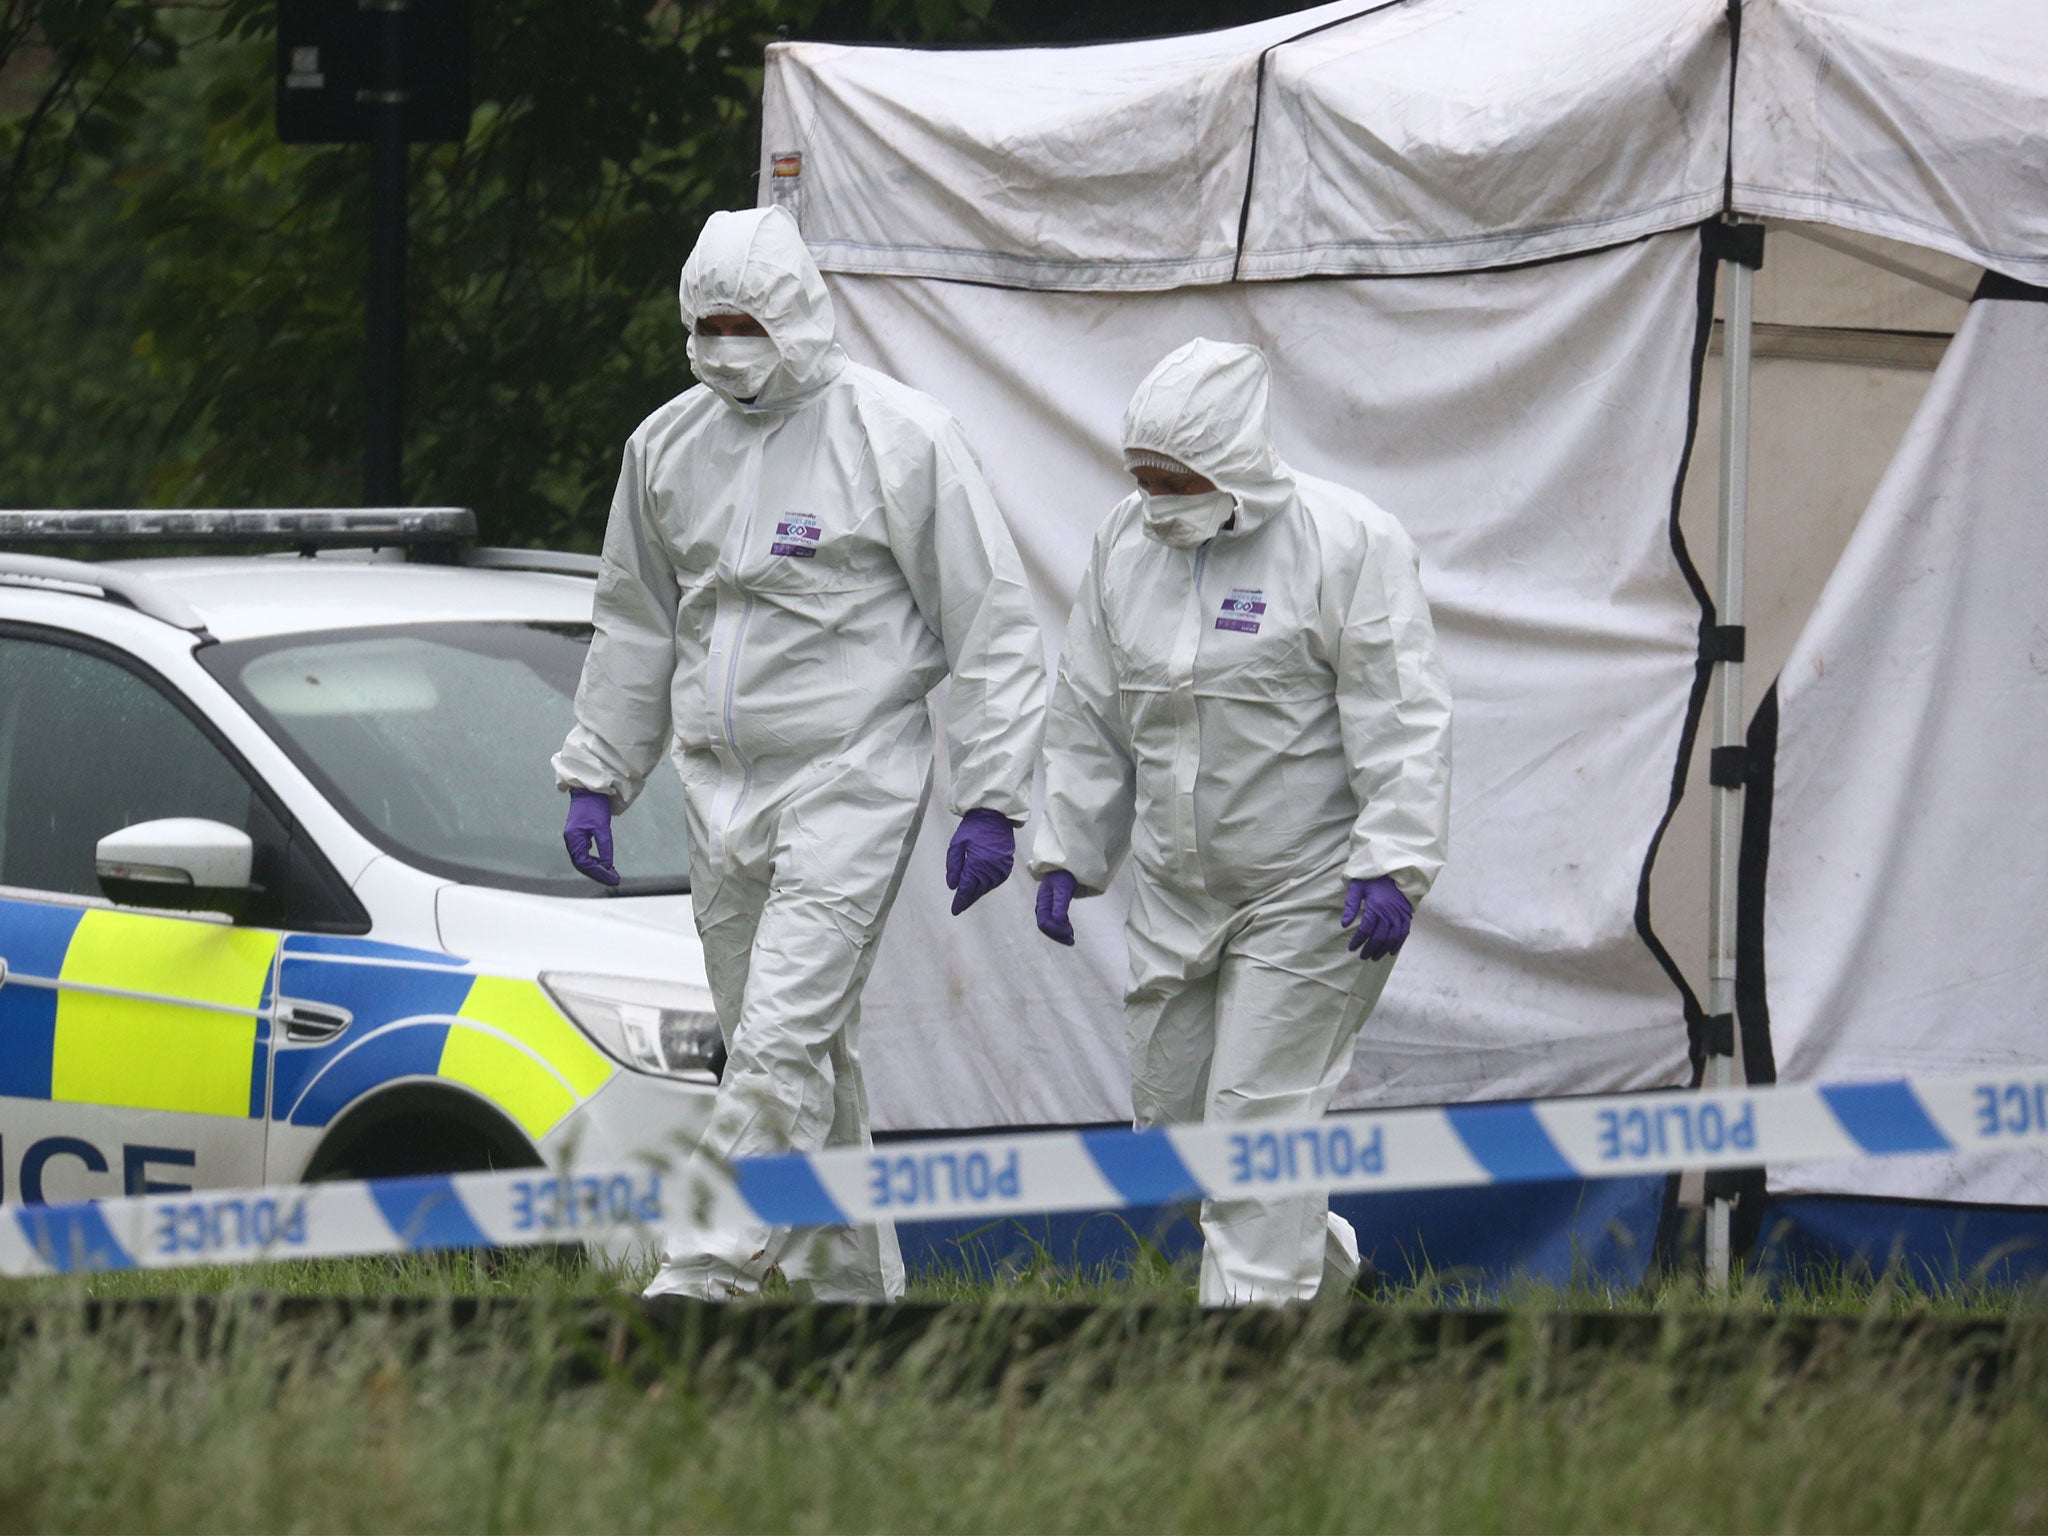 Forensics officers conducting investigations at the scene of the killing on Friday